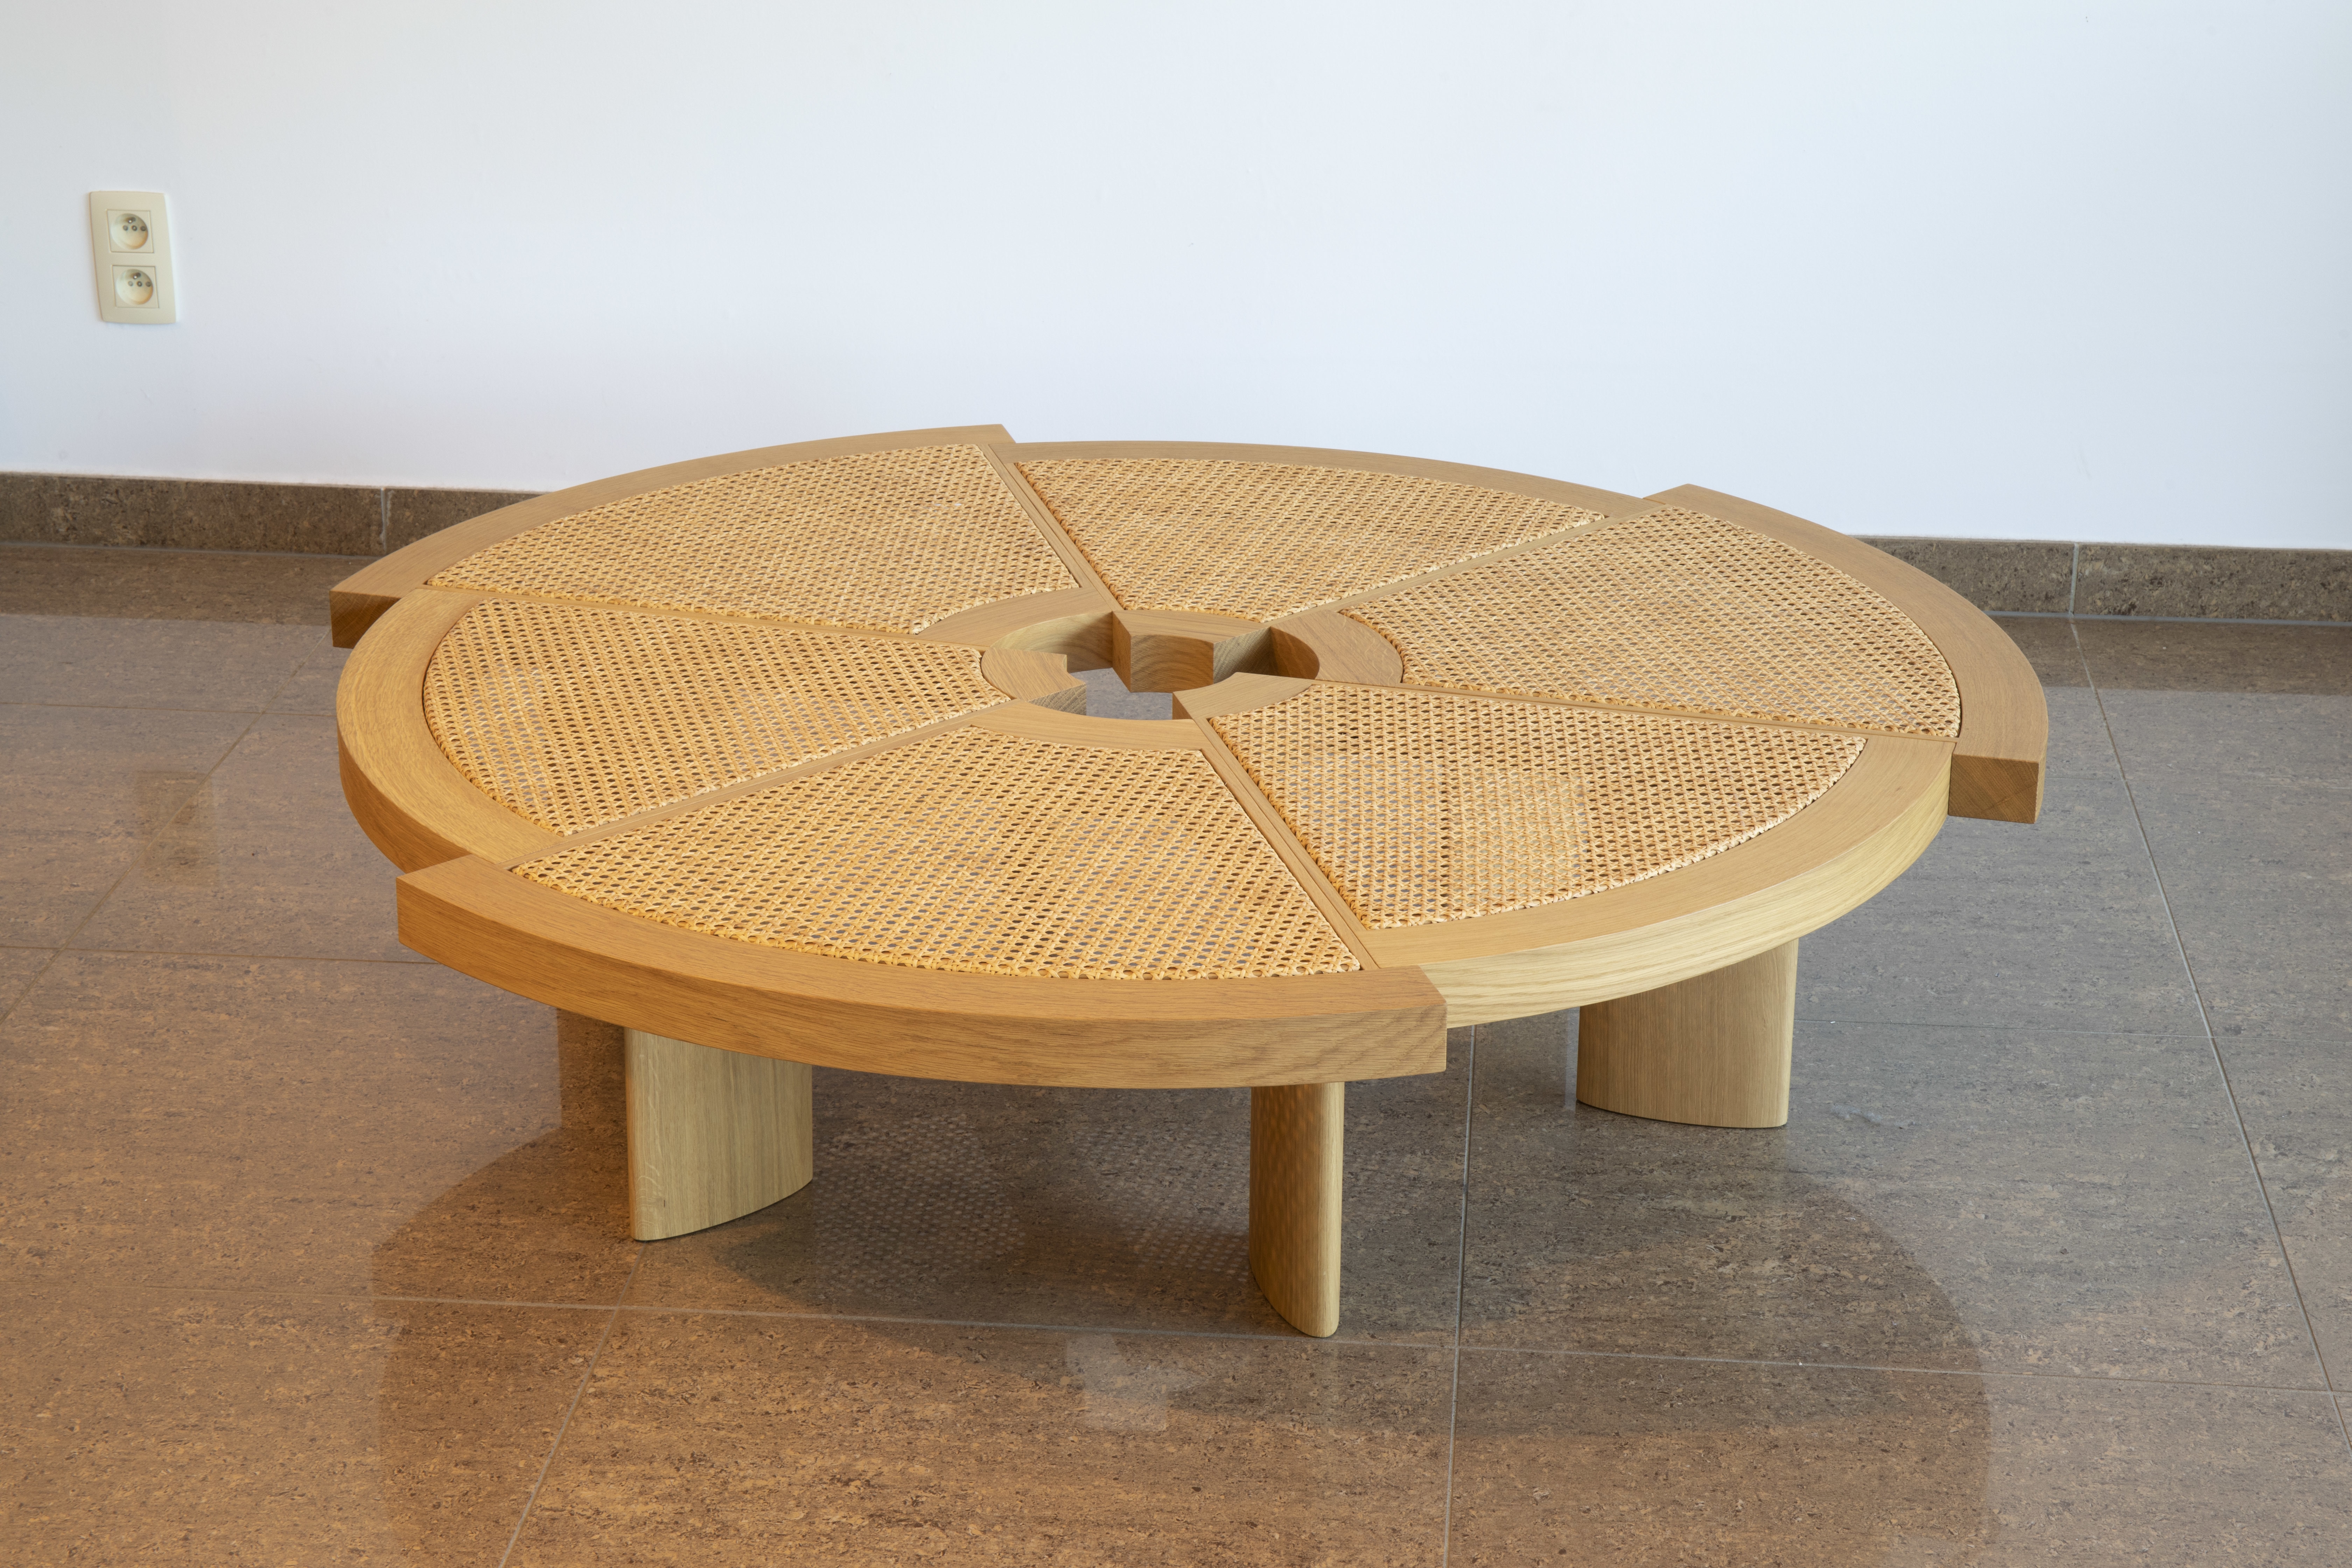 Rio Coffee Table by Charlotte Perriand